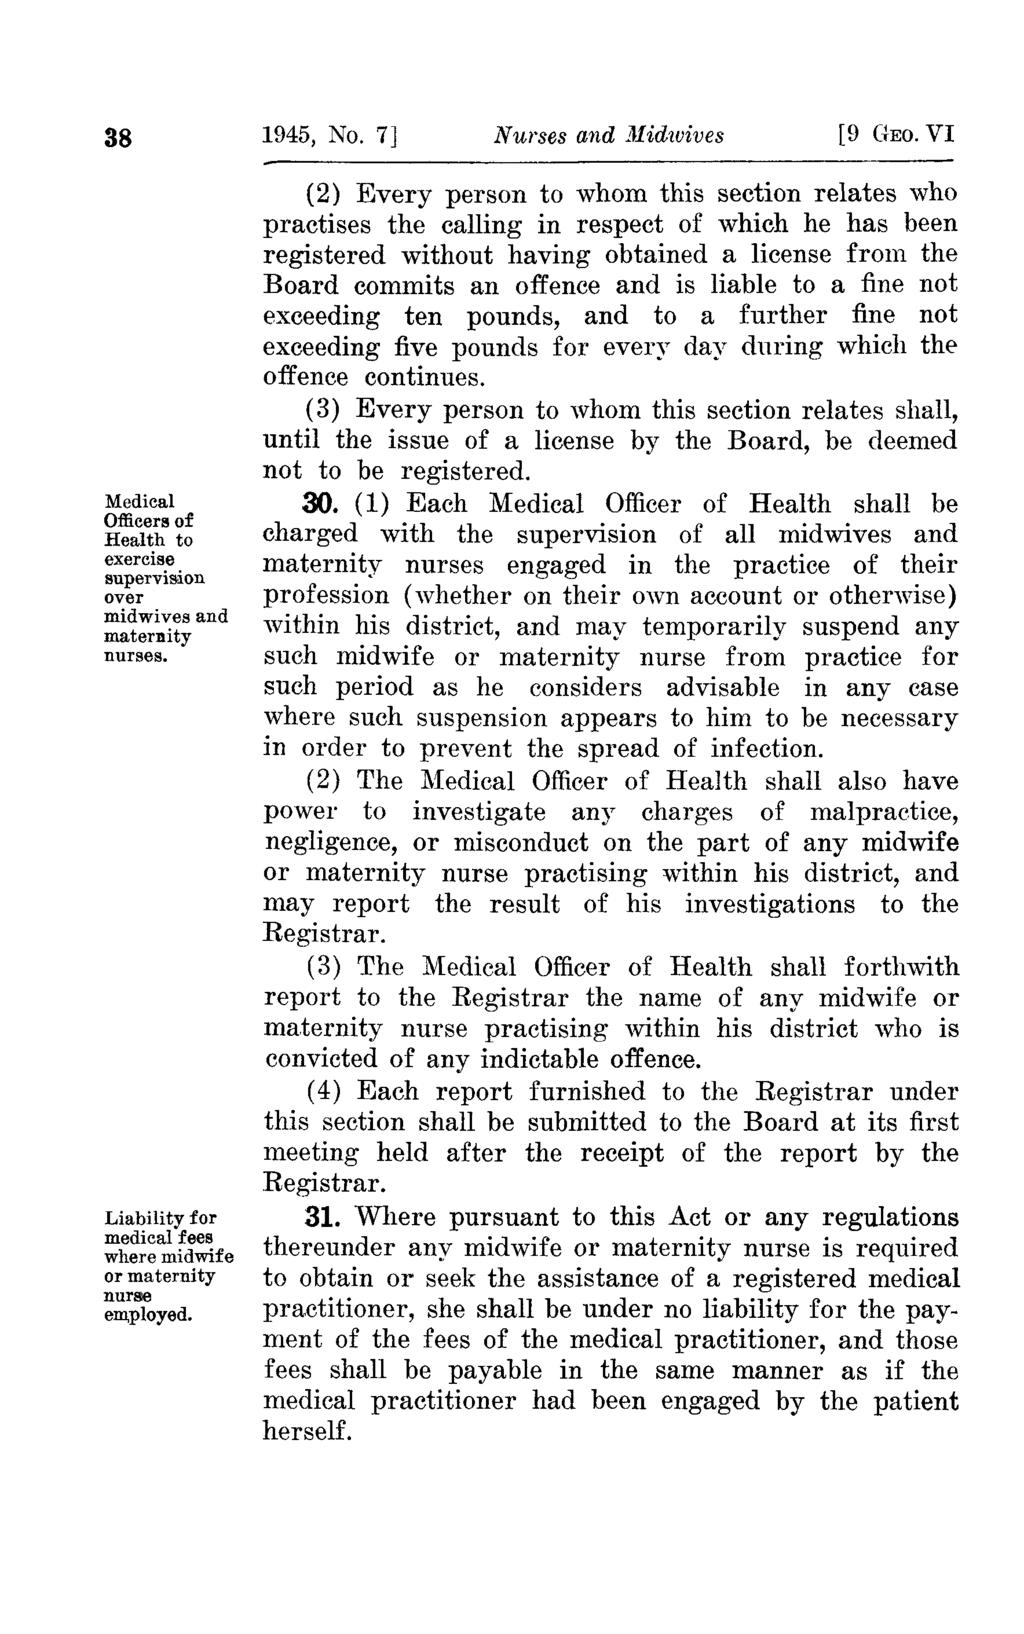 38 Medical Officers of Health to exercise supervision over midwives and maternity nurses. Liability for medical fees where midwife or maternity nurse employed. 1945, No.